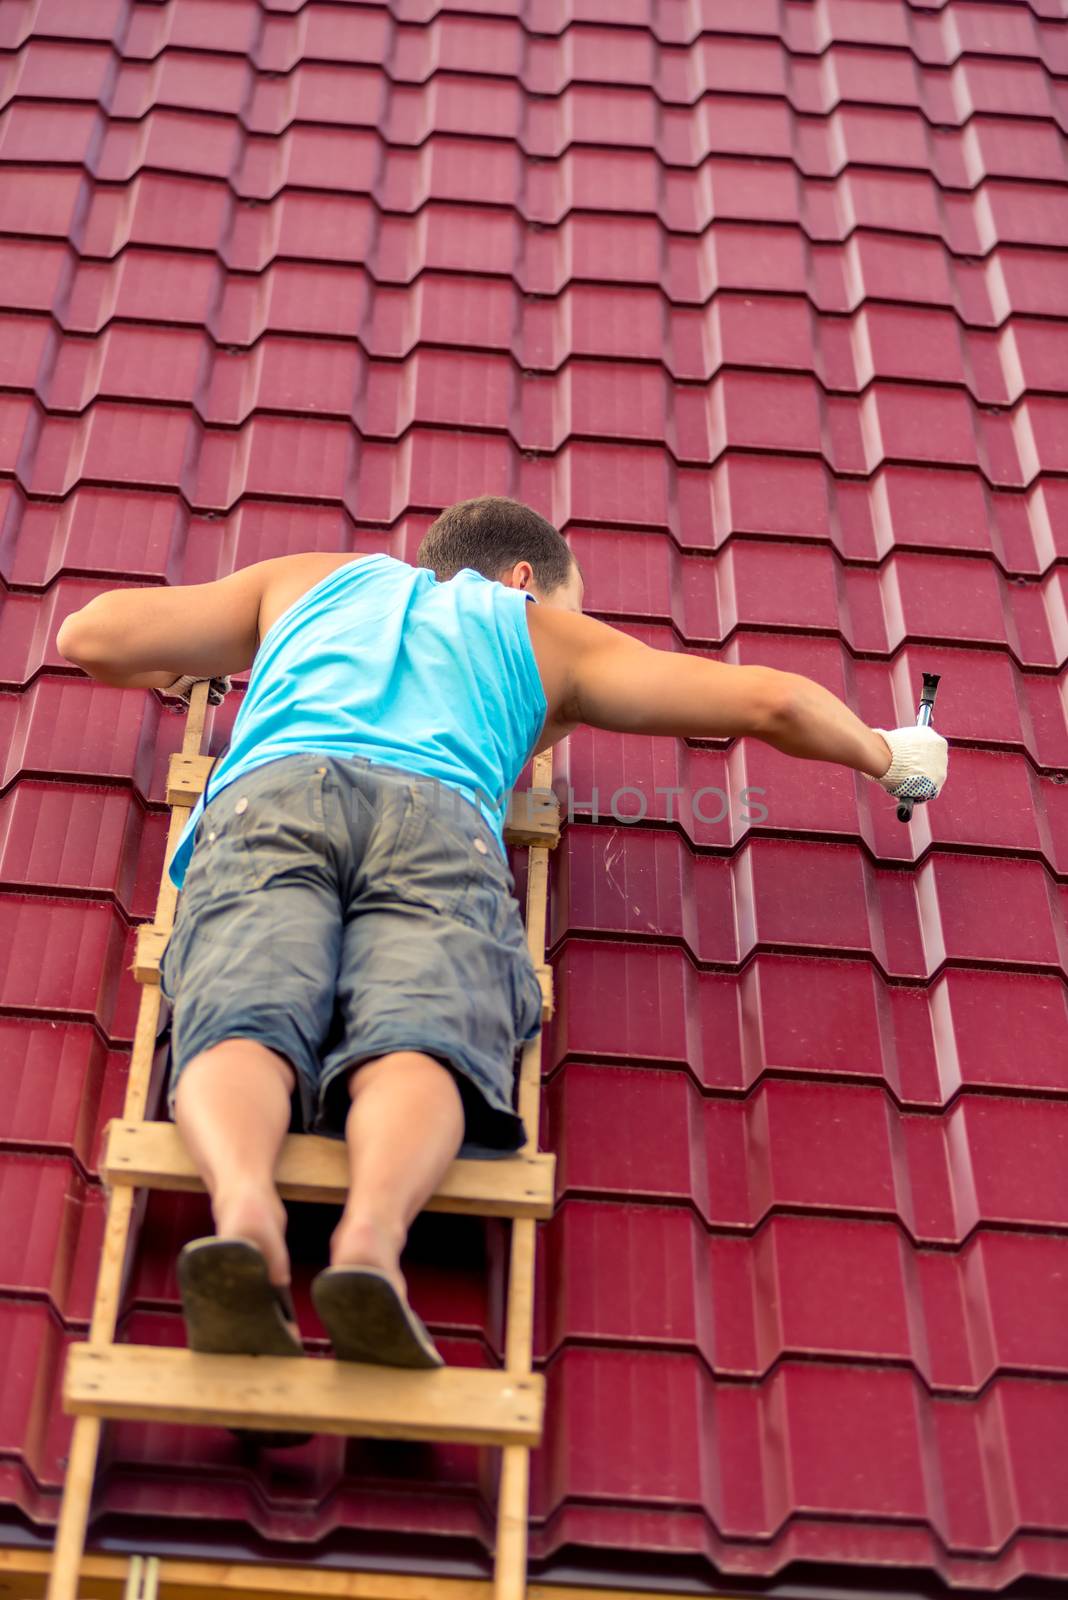 A man on the stairs with a hammer repairs the roof covering the house